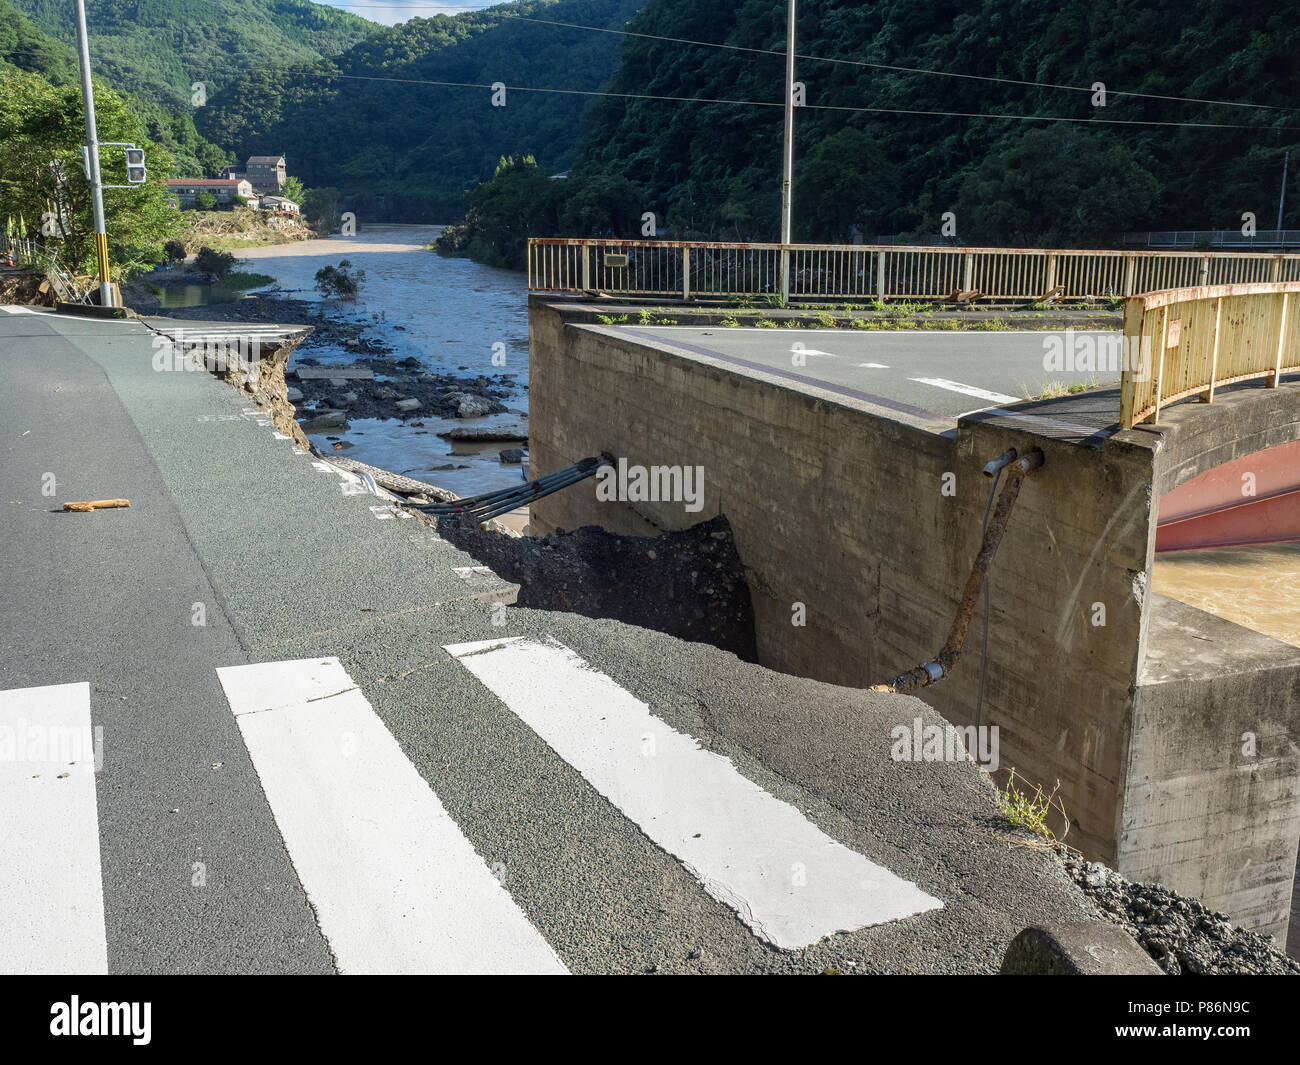 July 9, 2018, Nomura, Ehime Prefecture: The aftermath of the flood from Hijikawa river. In Seiyo City, Ehime Prefecture, the Hijikawa River flooded, leaving three men and two women dead. Local residents survey the damage and work out what to do next. (Photo by Tomohiro Takahashi/AFLO) Stock Photo